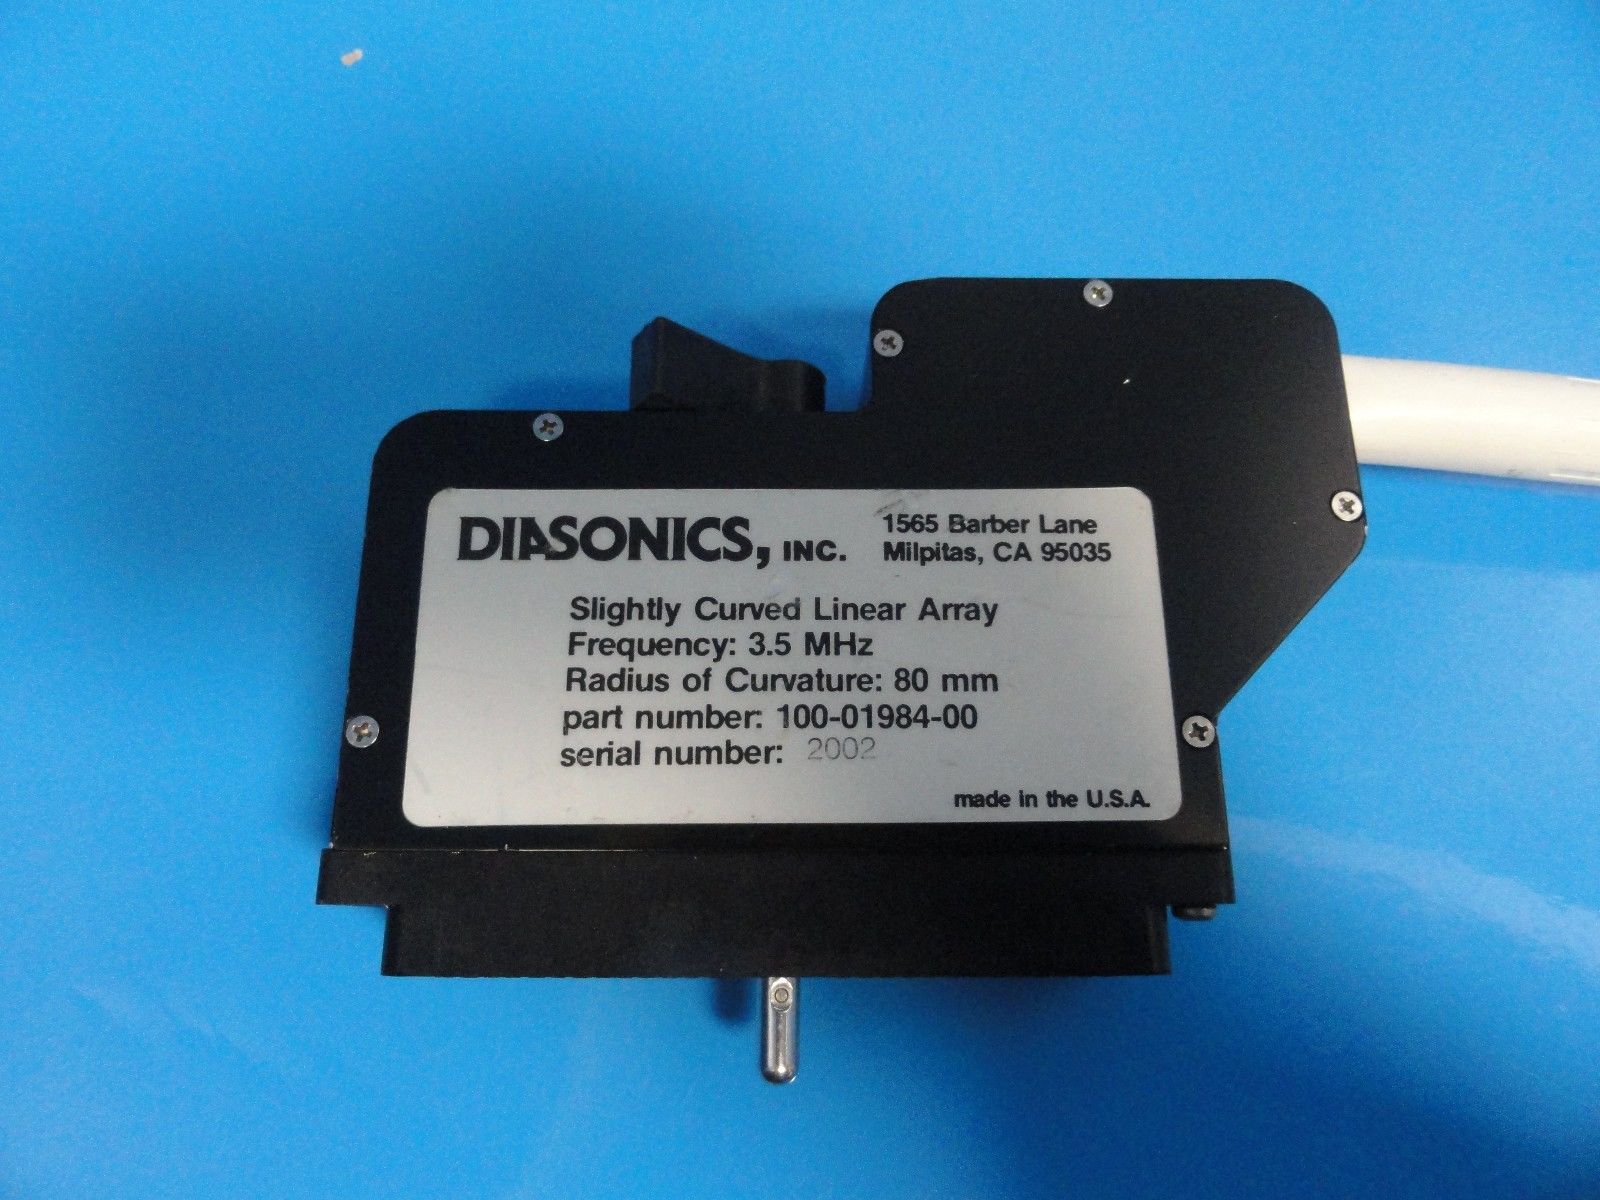 GE Diasonics 3.5 MHz Slightly Curved Linear Array Probe P/N 100-01984-00 (10219) DIAGNOSTIC ULTRASOUND MACHINES FOR SALE